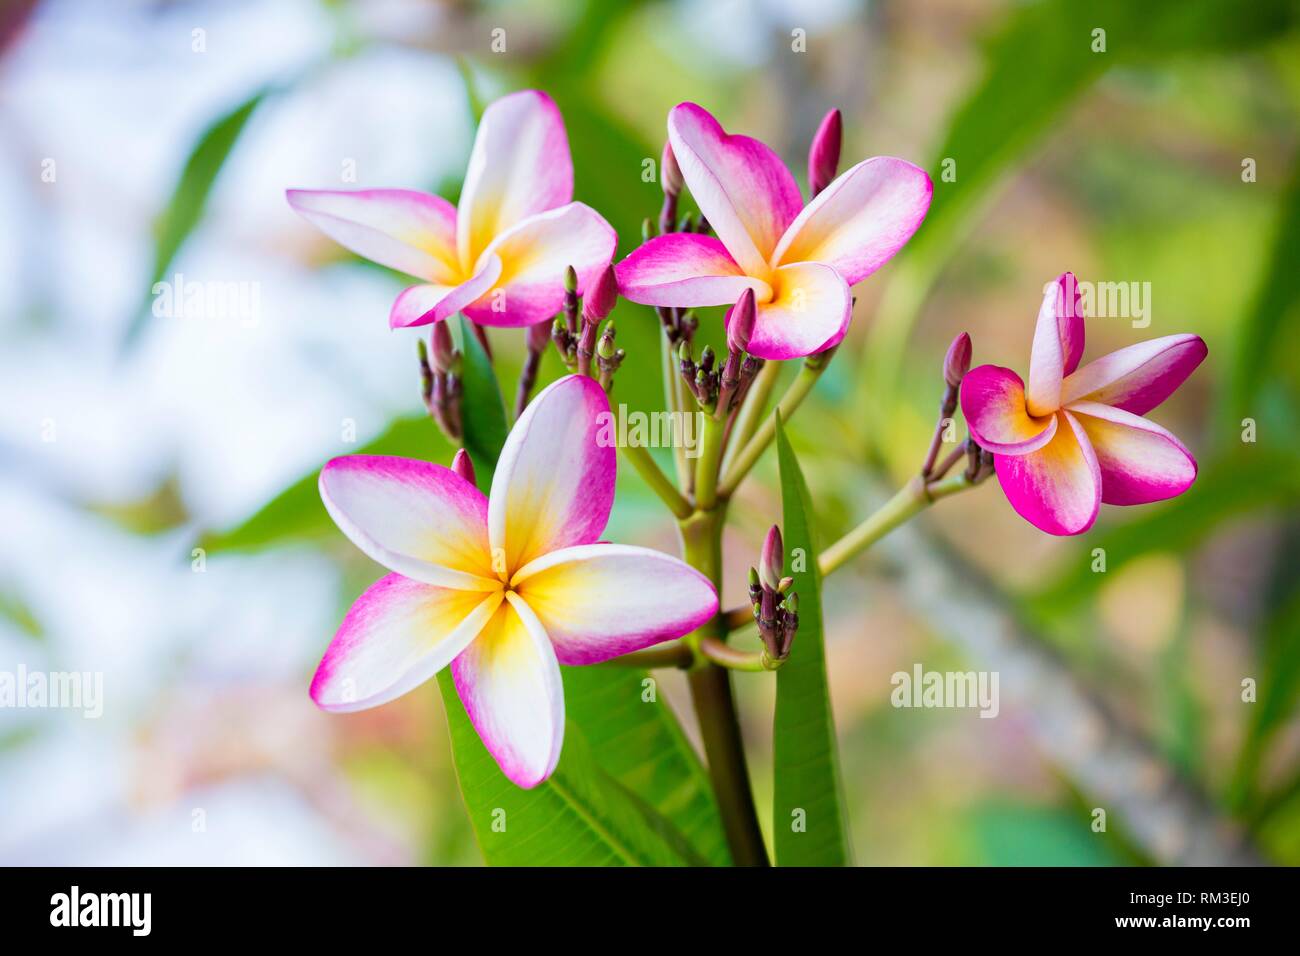 Plumeria common name plumeria is a genus of flowering plants in the dogbane family, Apocynaceae. It contains primarily deciduous shrubs and small Stock Photo